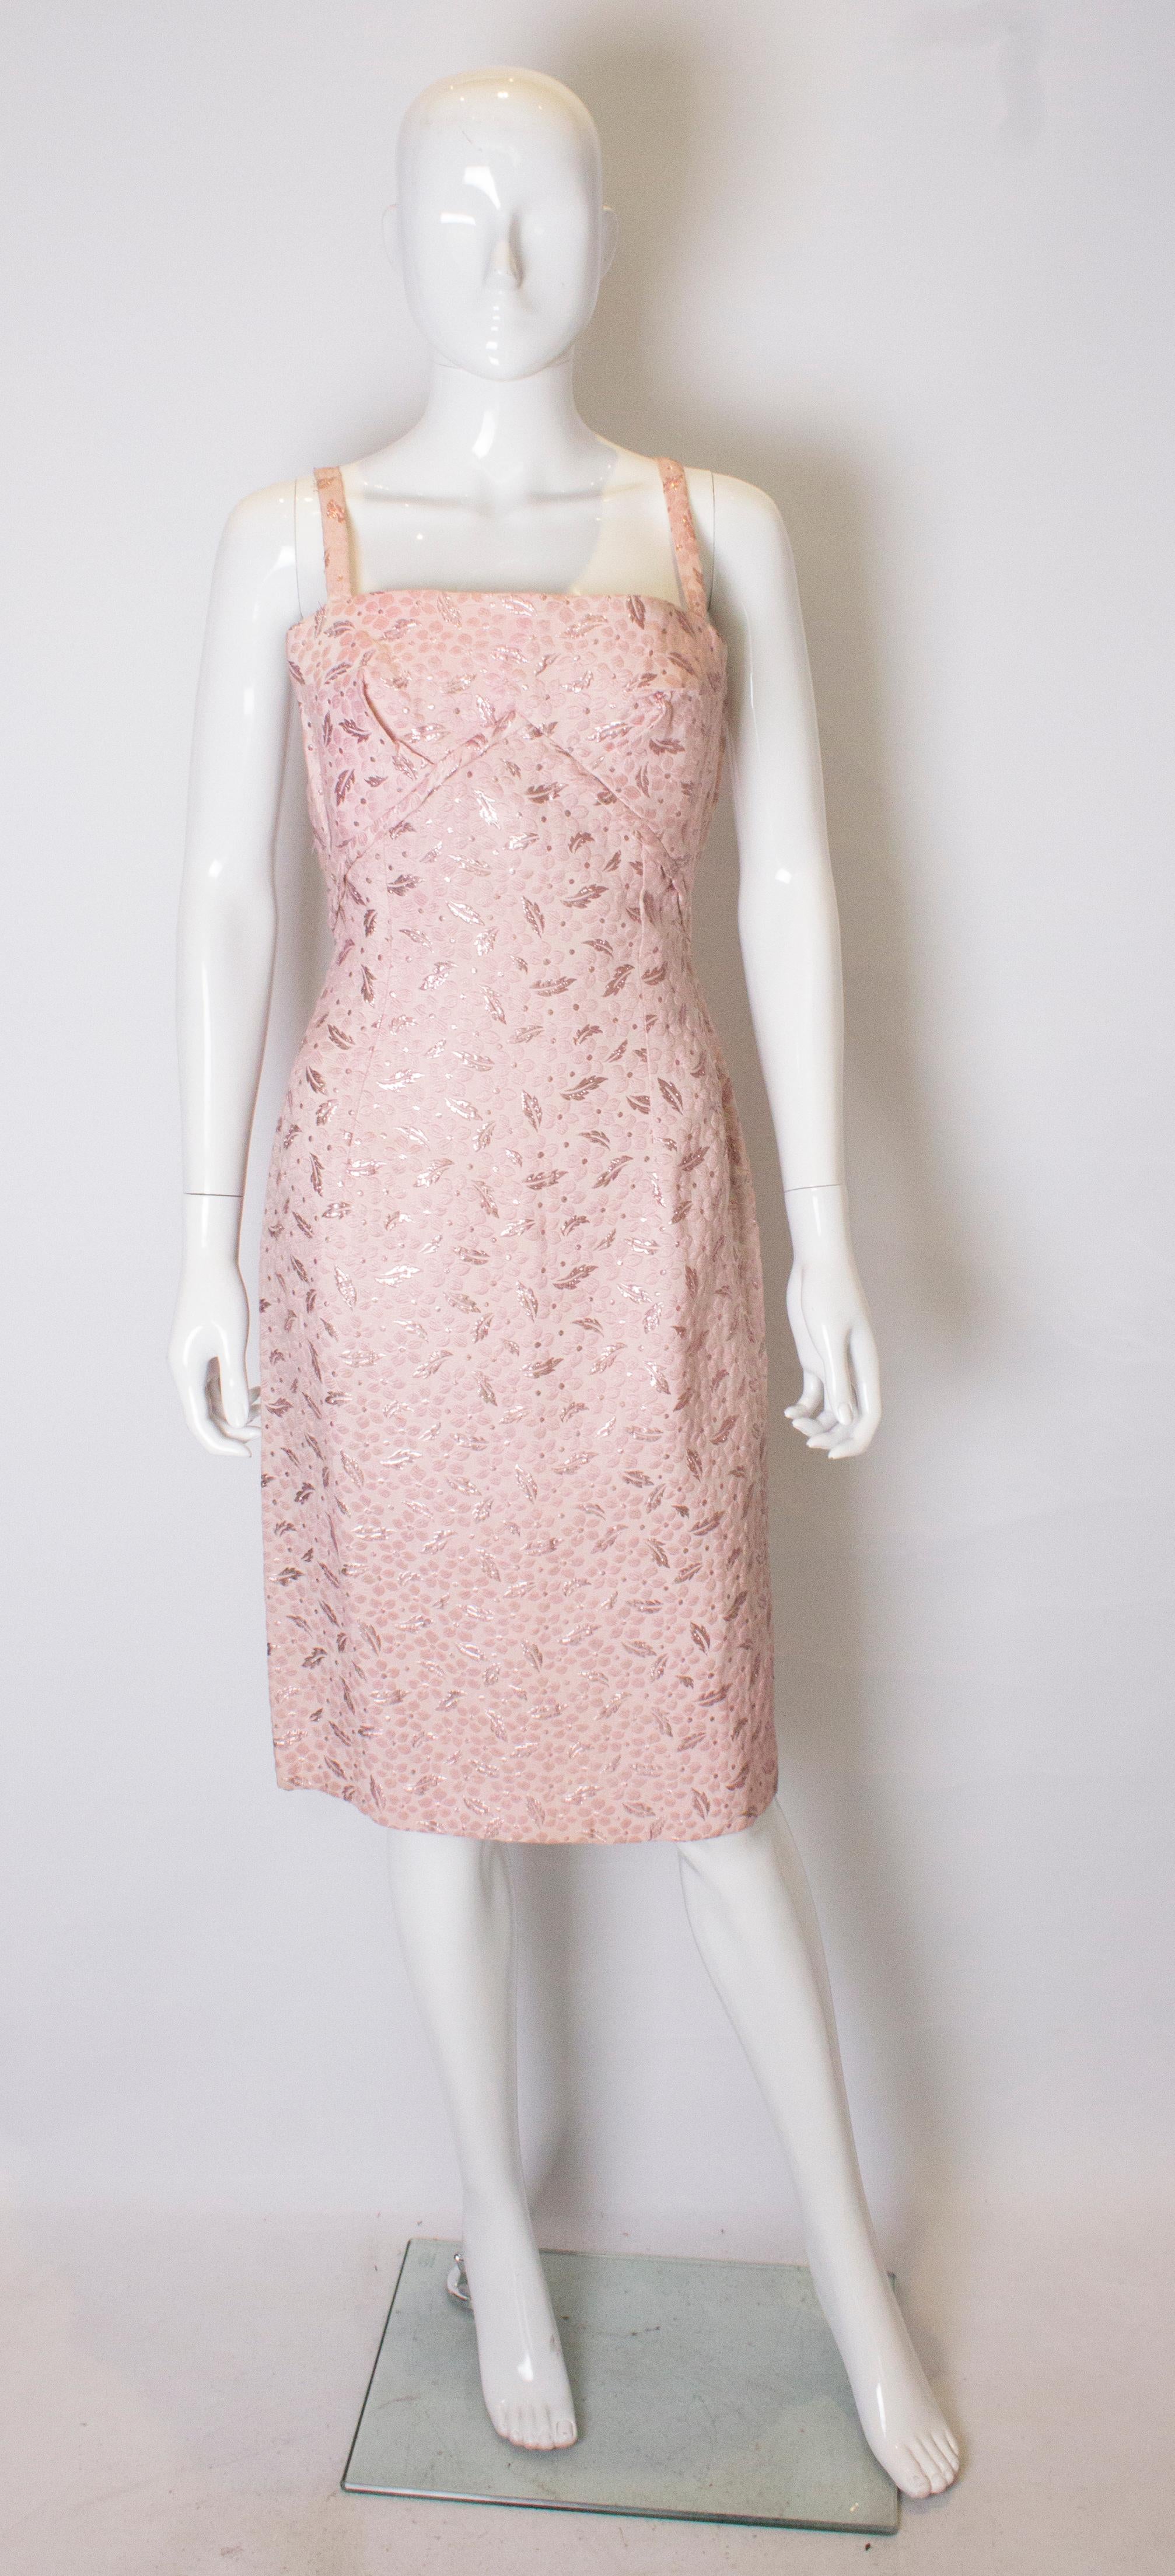 A chic dress for Spring / Summer. In a  pretty textured pink fabric,  this dress has spagetti straps , a floral print, , side zip opening and folds under the bust. The dress is unlined.